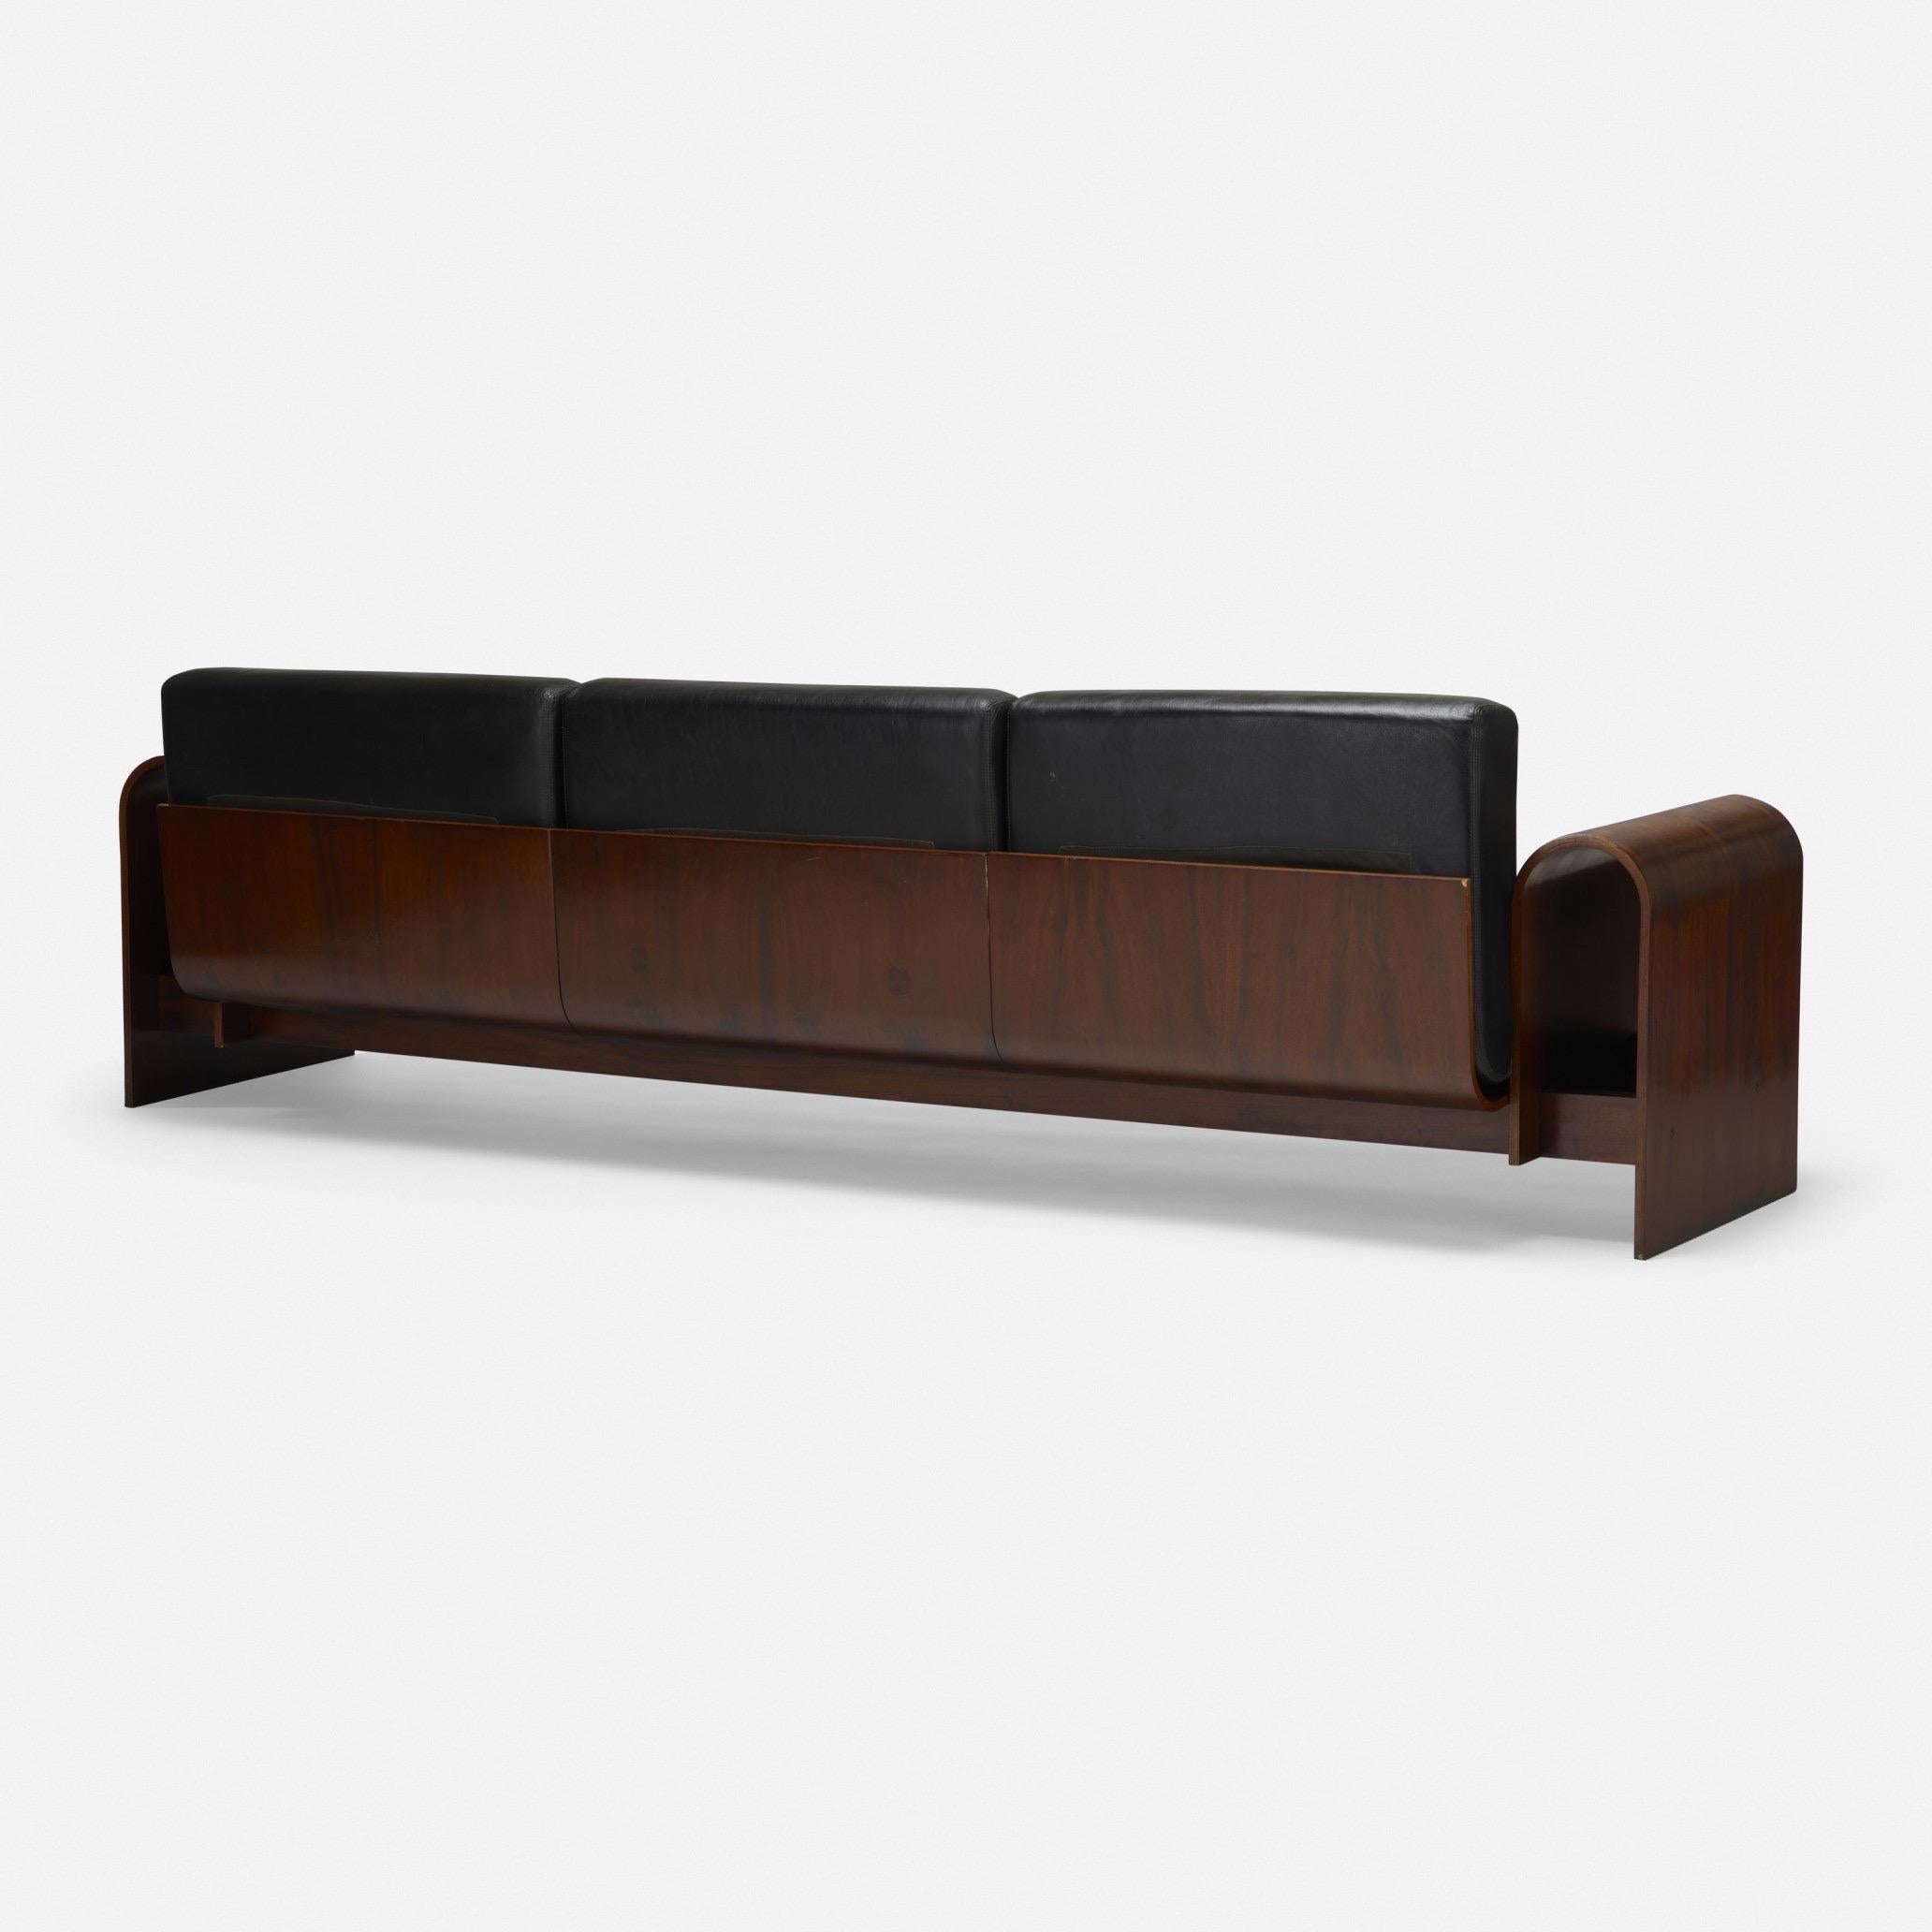 Mid-Century Modern Oscar Niemeyer Exceptional Sofa in Rosewood and Leather, Hotel SESC, Brazil 1990 For Sale